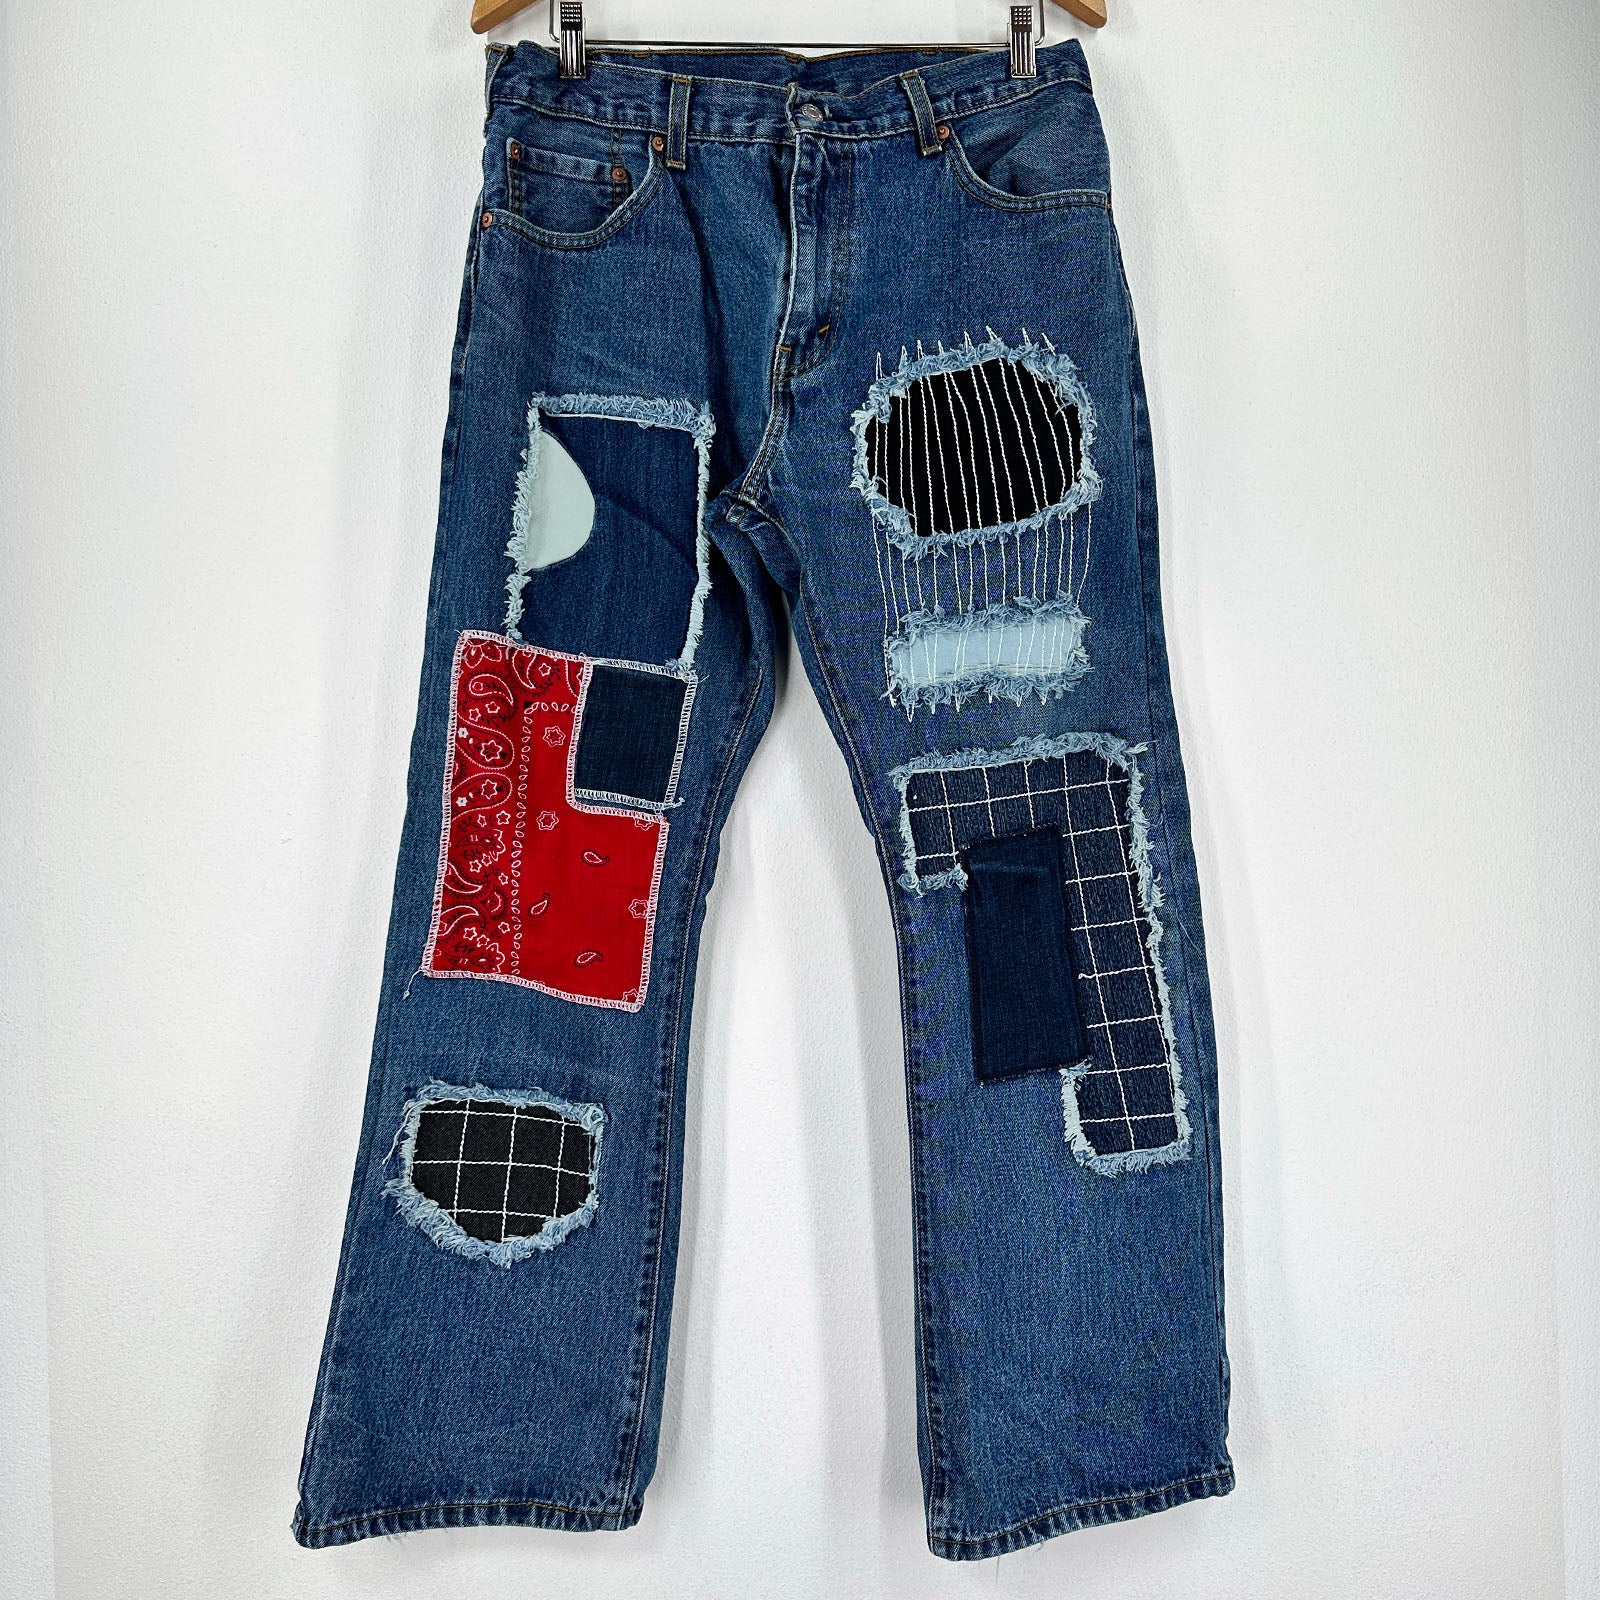 Bandana Patched Reclaimed Levi's 517 Boot Cut - 33x29 Great Lakes Reclaimed Denim